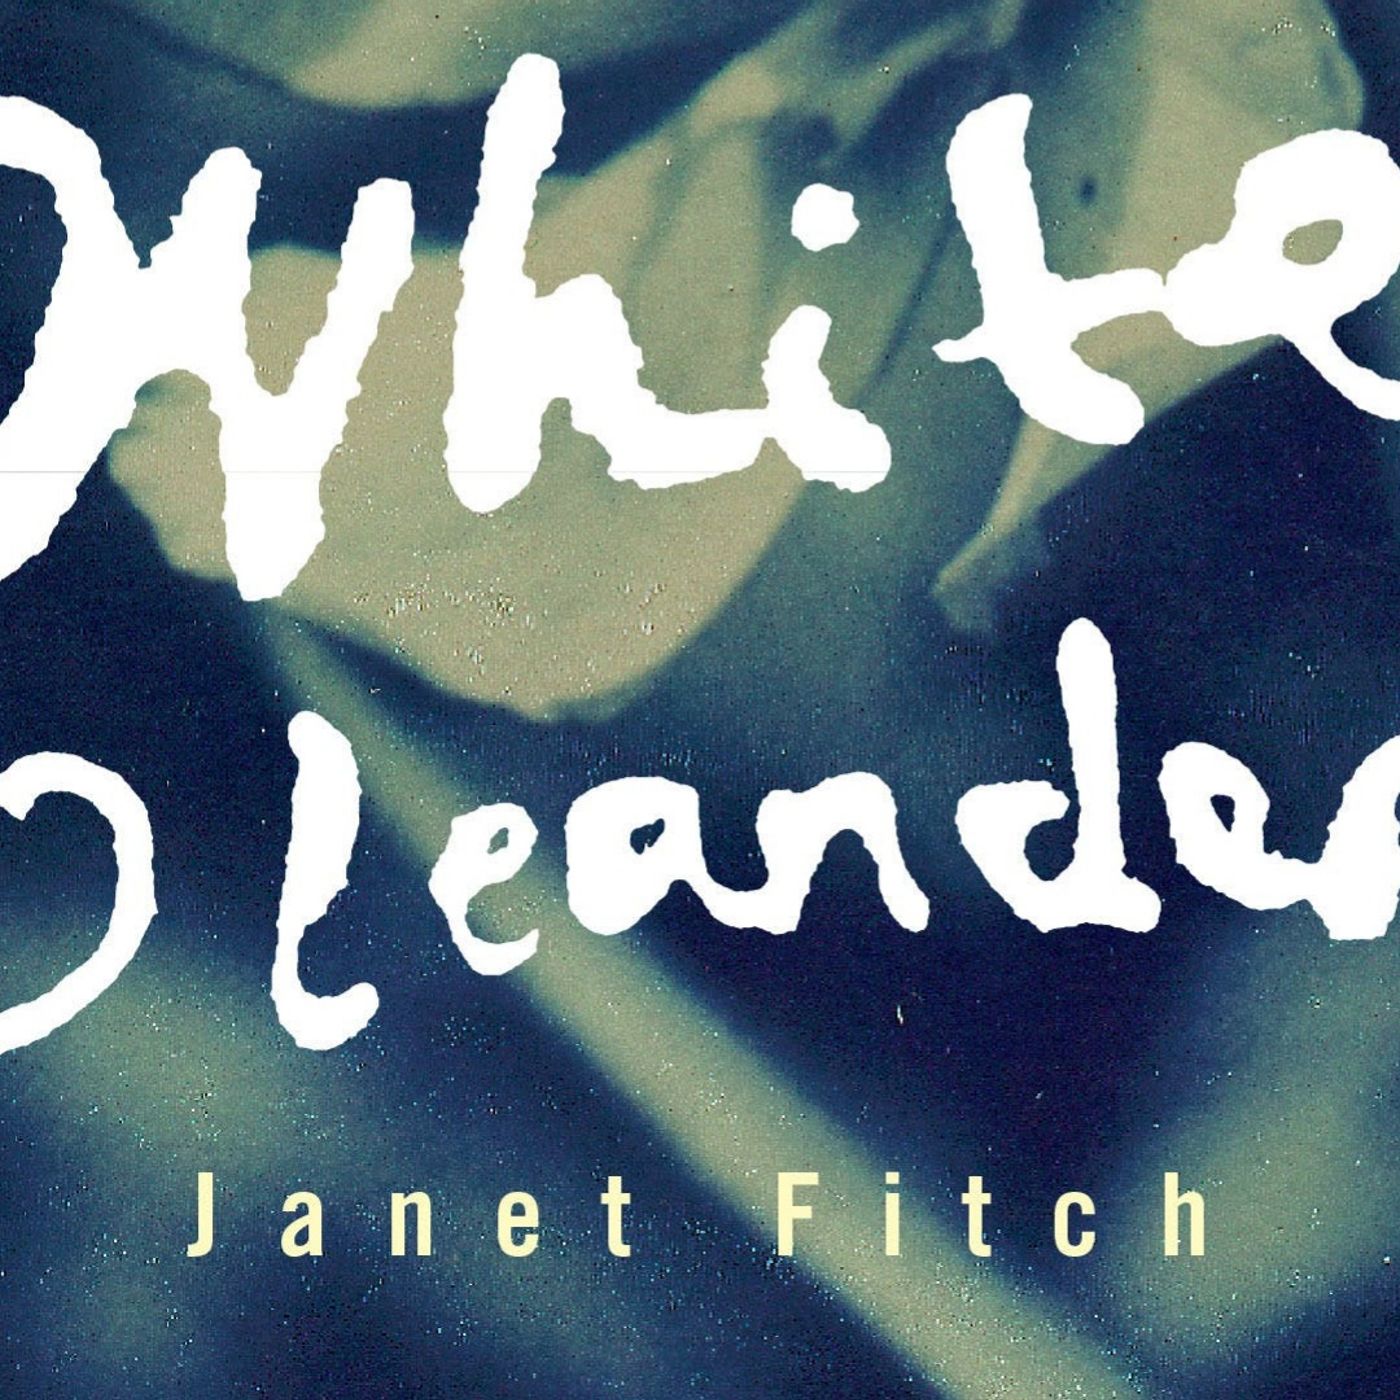 the book white oleander